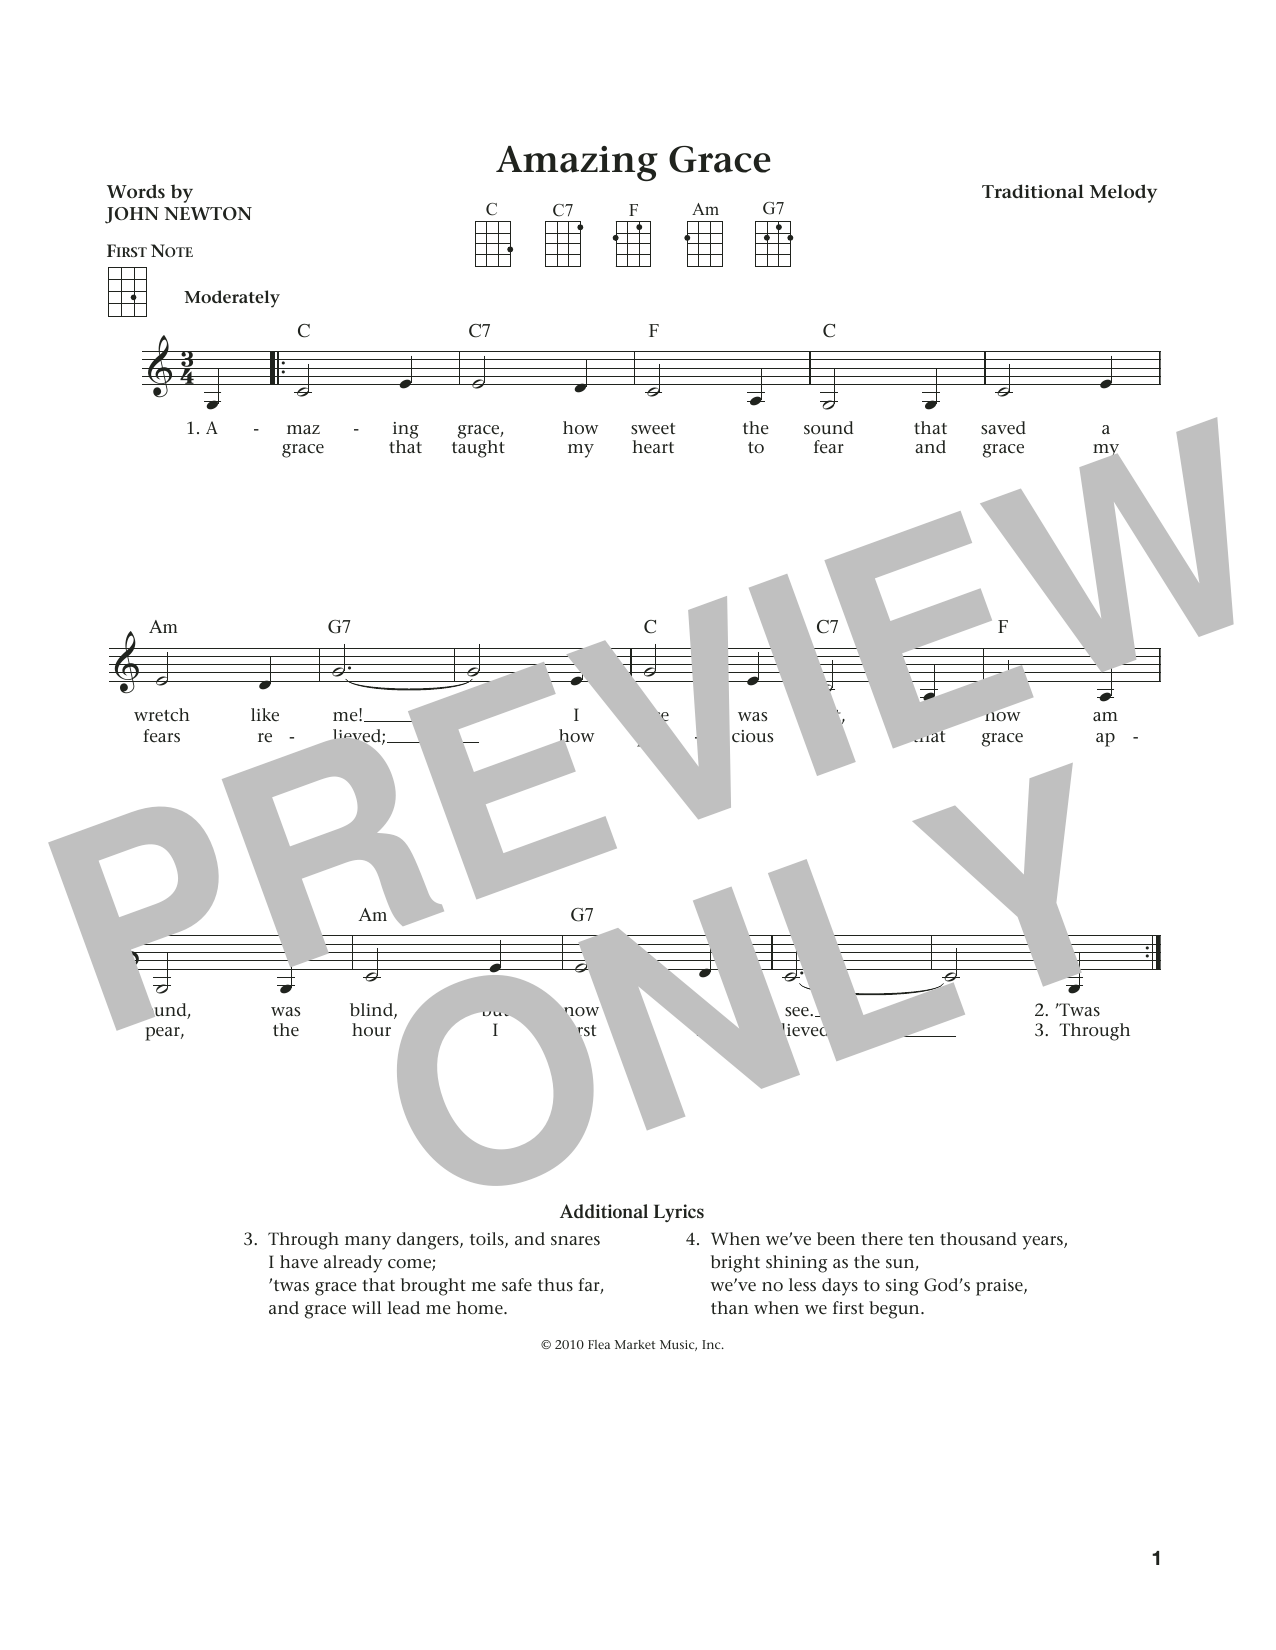 Download Traditional American Melody Amazing Grace (from The Daily Ukulele) Sheet Music